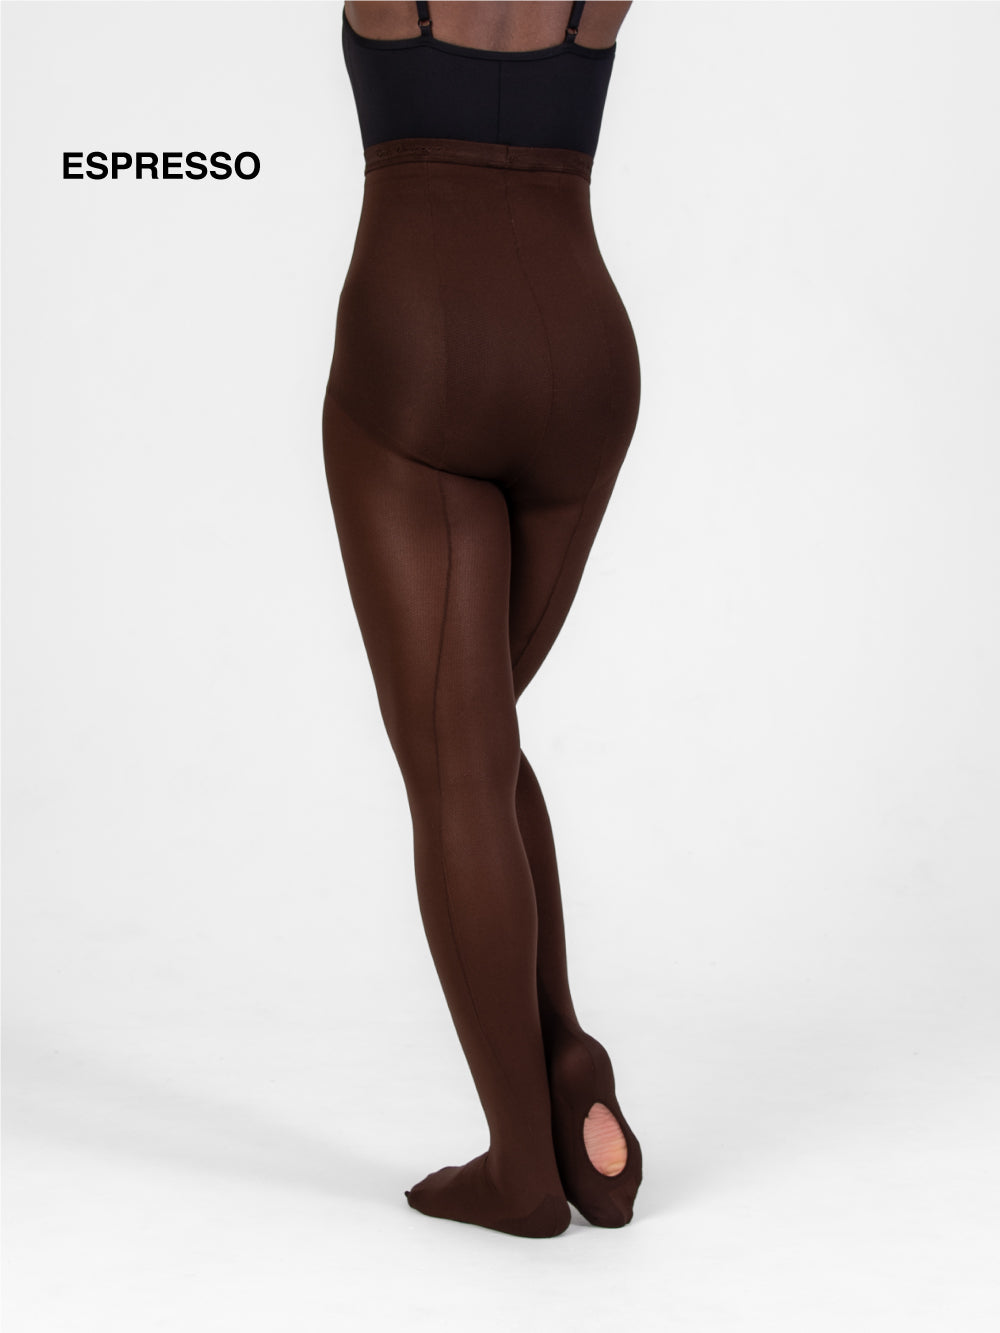 TotalSTRETCH Back Seam Regular Mesh Convertible Tights – Body Wrappers